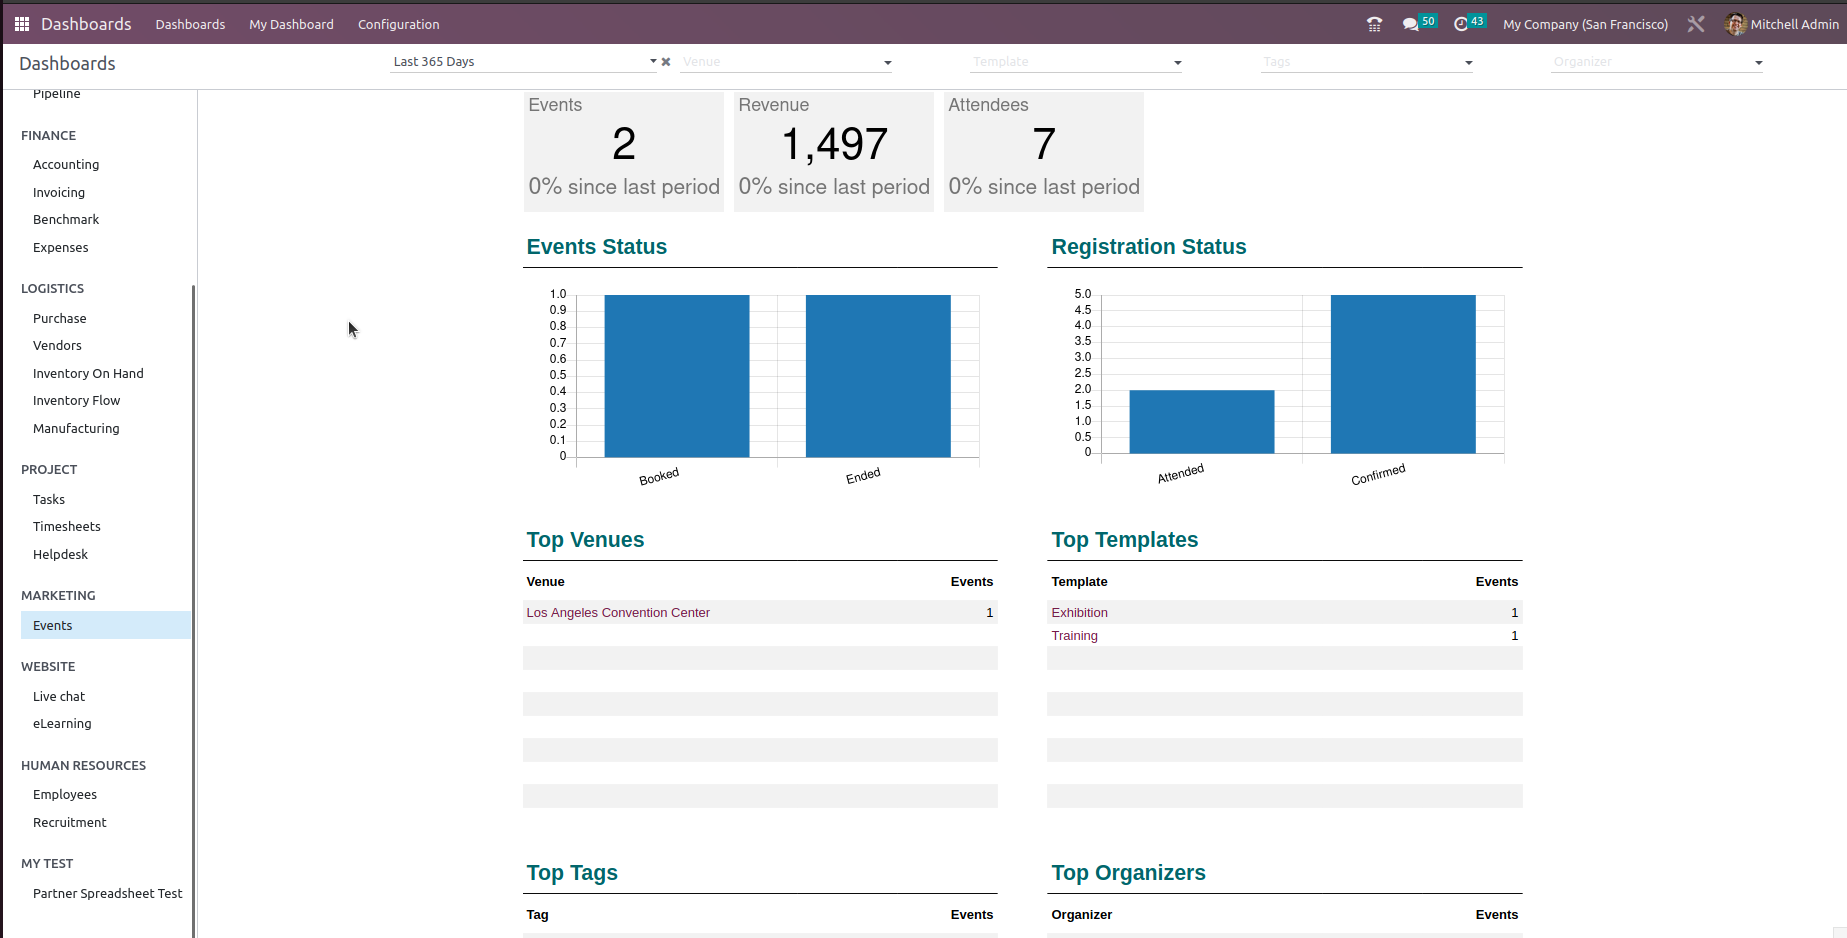 In the Dashboards module, key figures can be displayed for all modules.